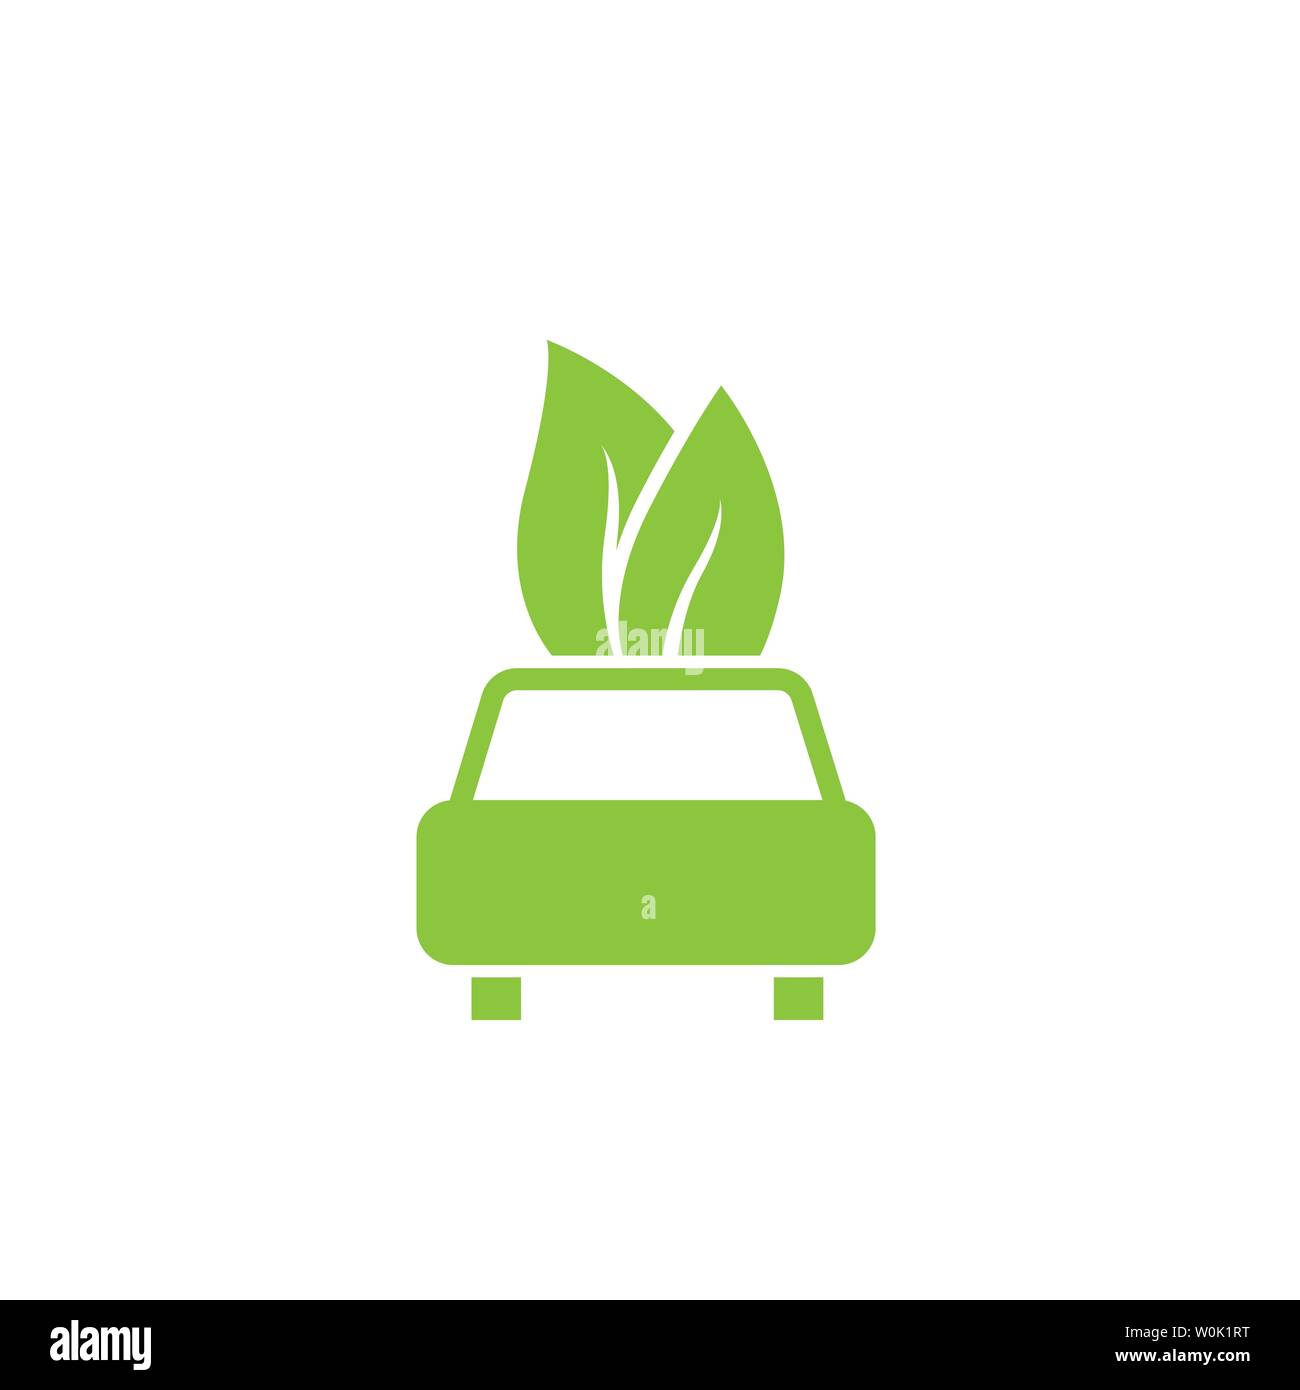 Electric car icon. Green car with leaves Vector illustration Stock Vector